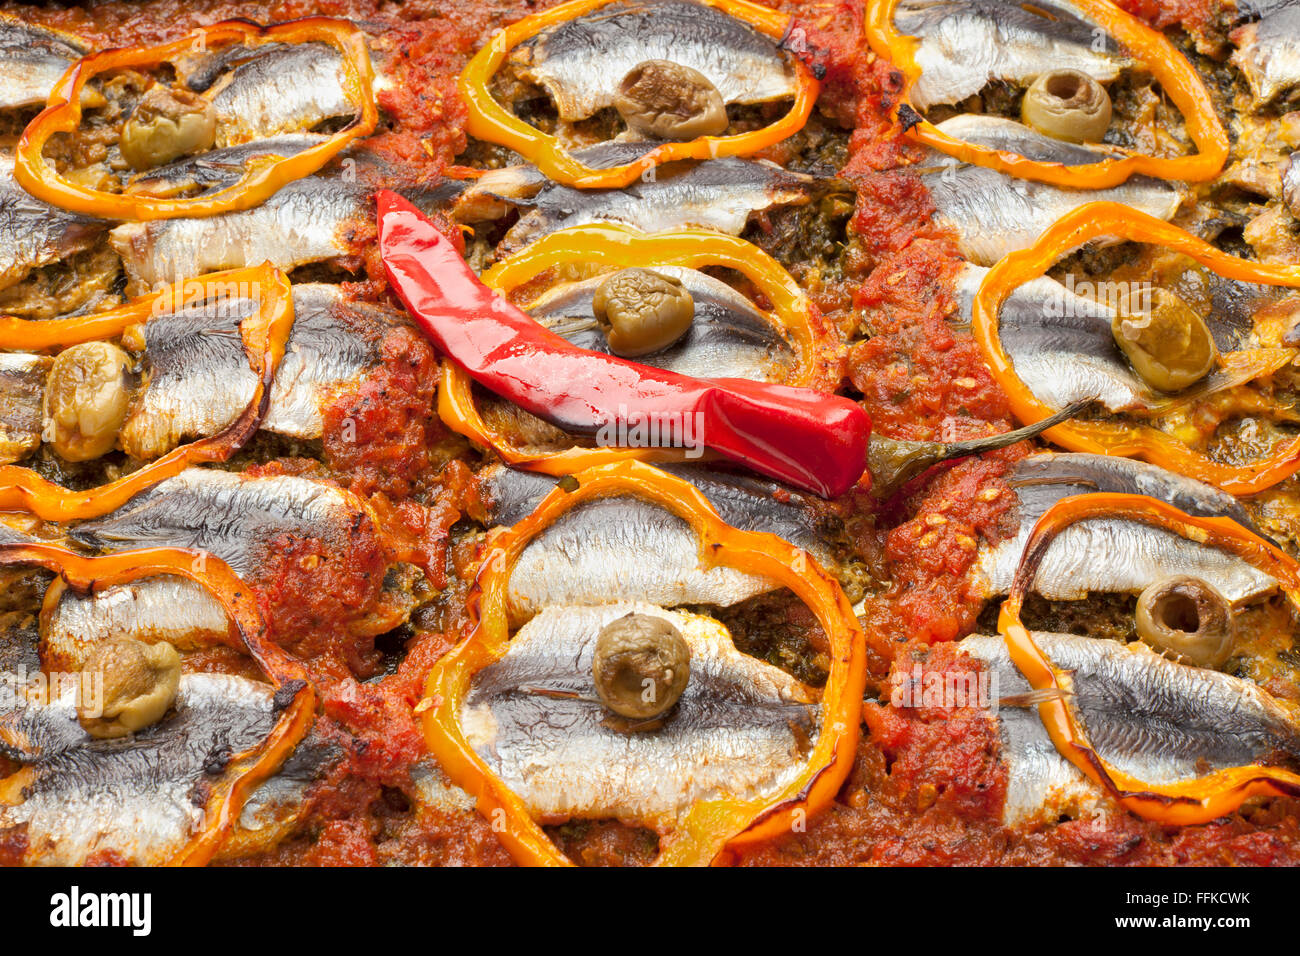 Traditional Moroccan sardine dish receipe with olives, bell peppers and chili peppe full frame Stock Photo